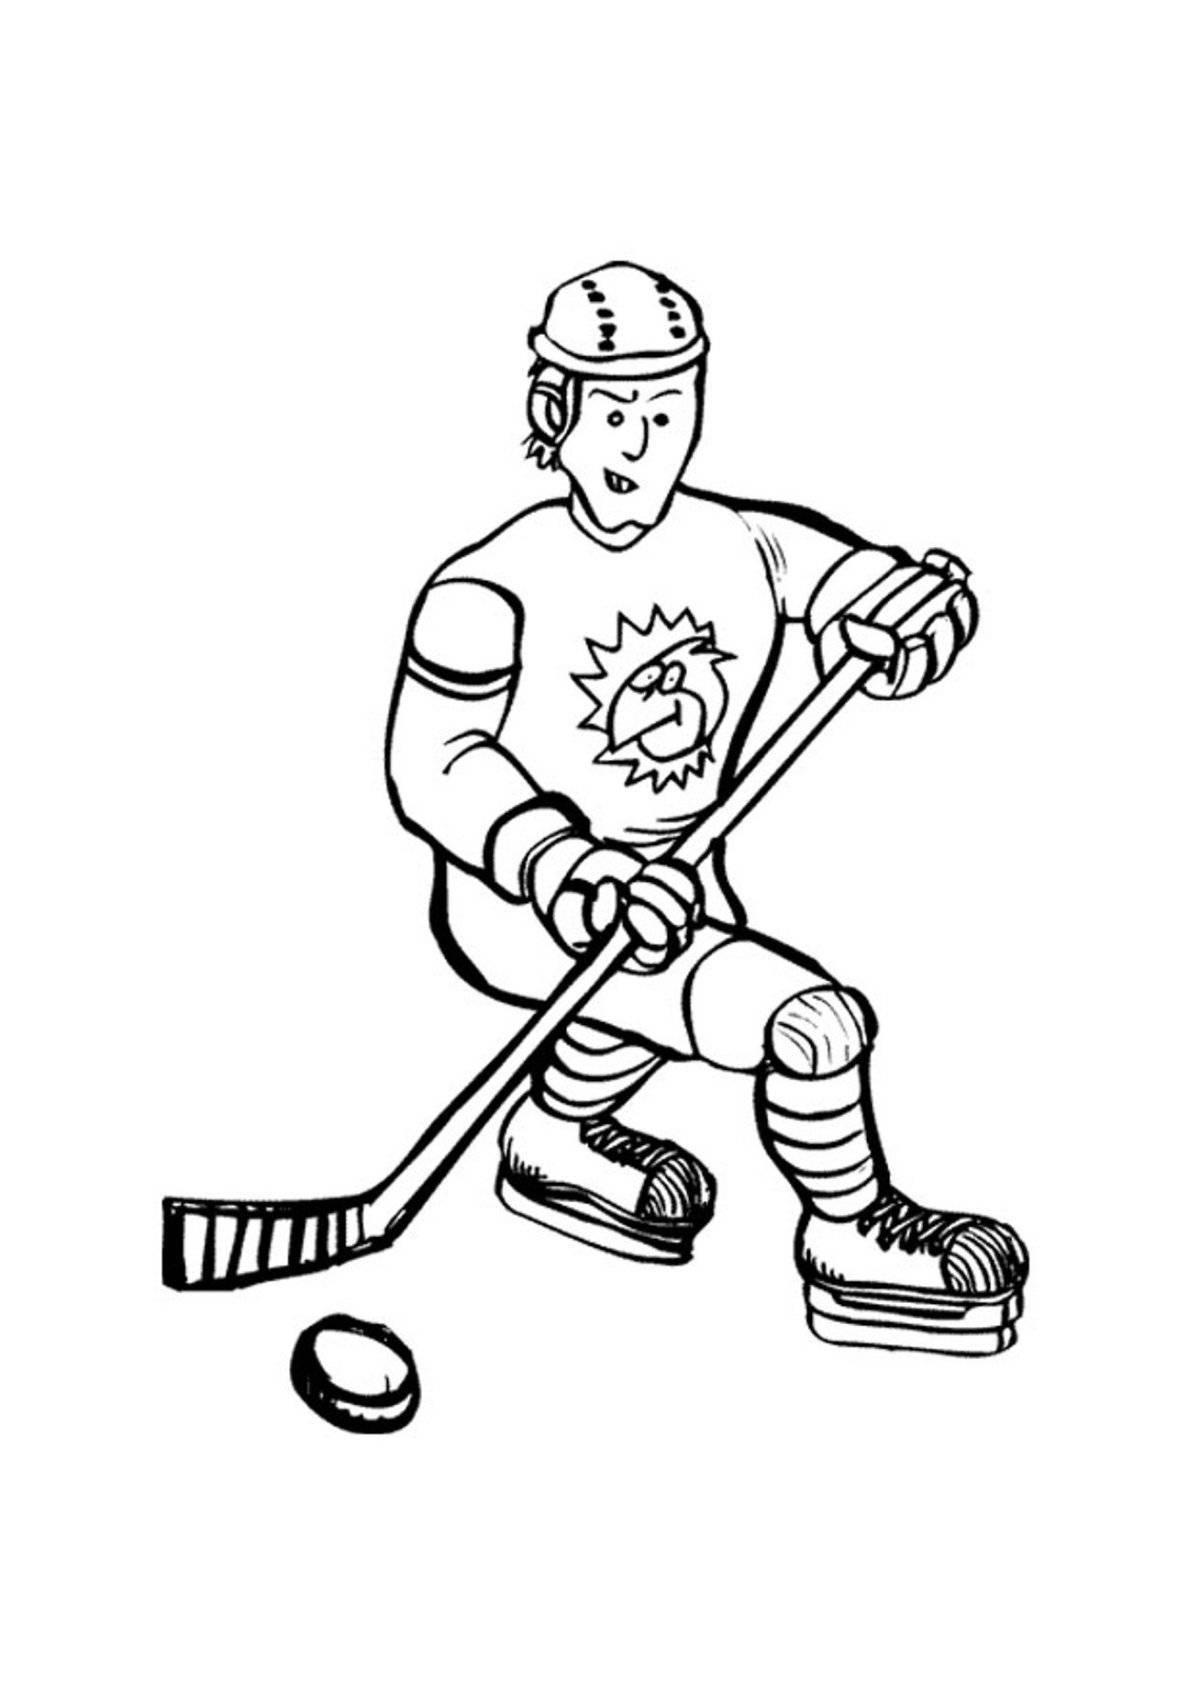 Adorable hockey player coloring pages for kids